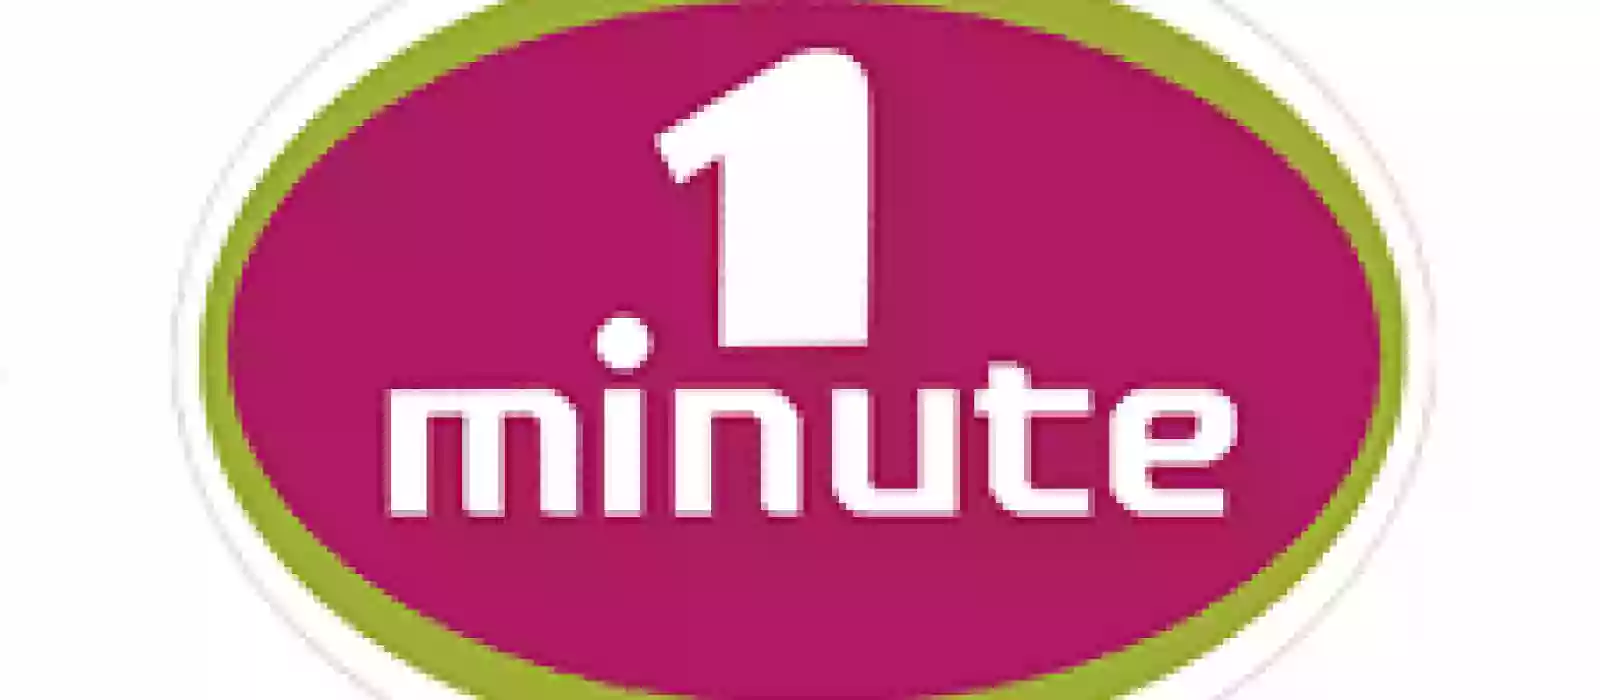 1Minute